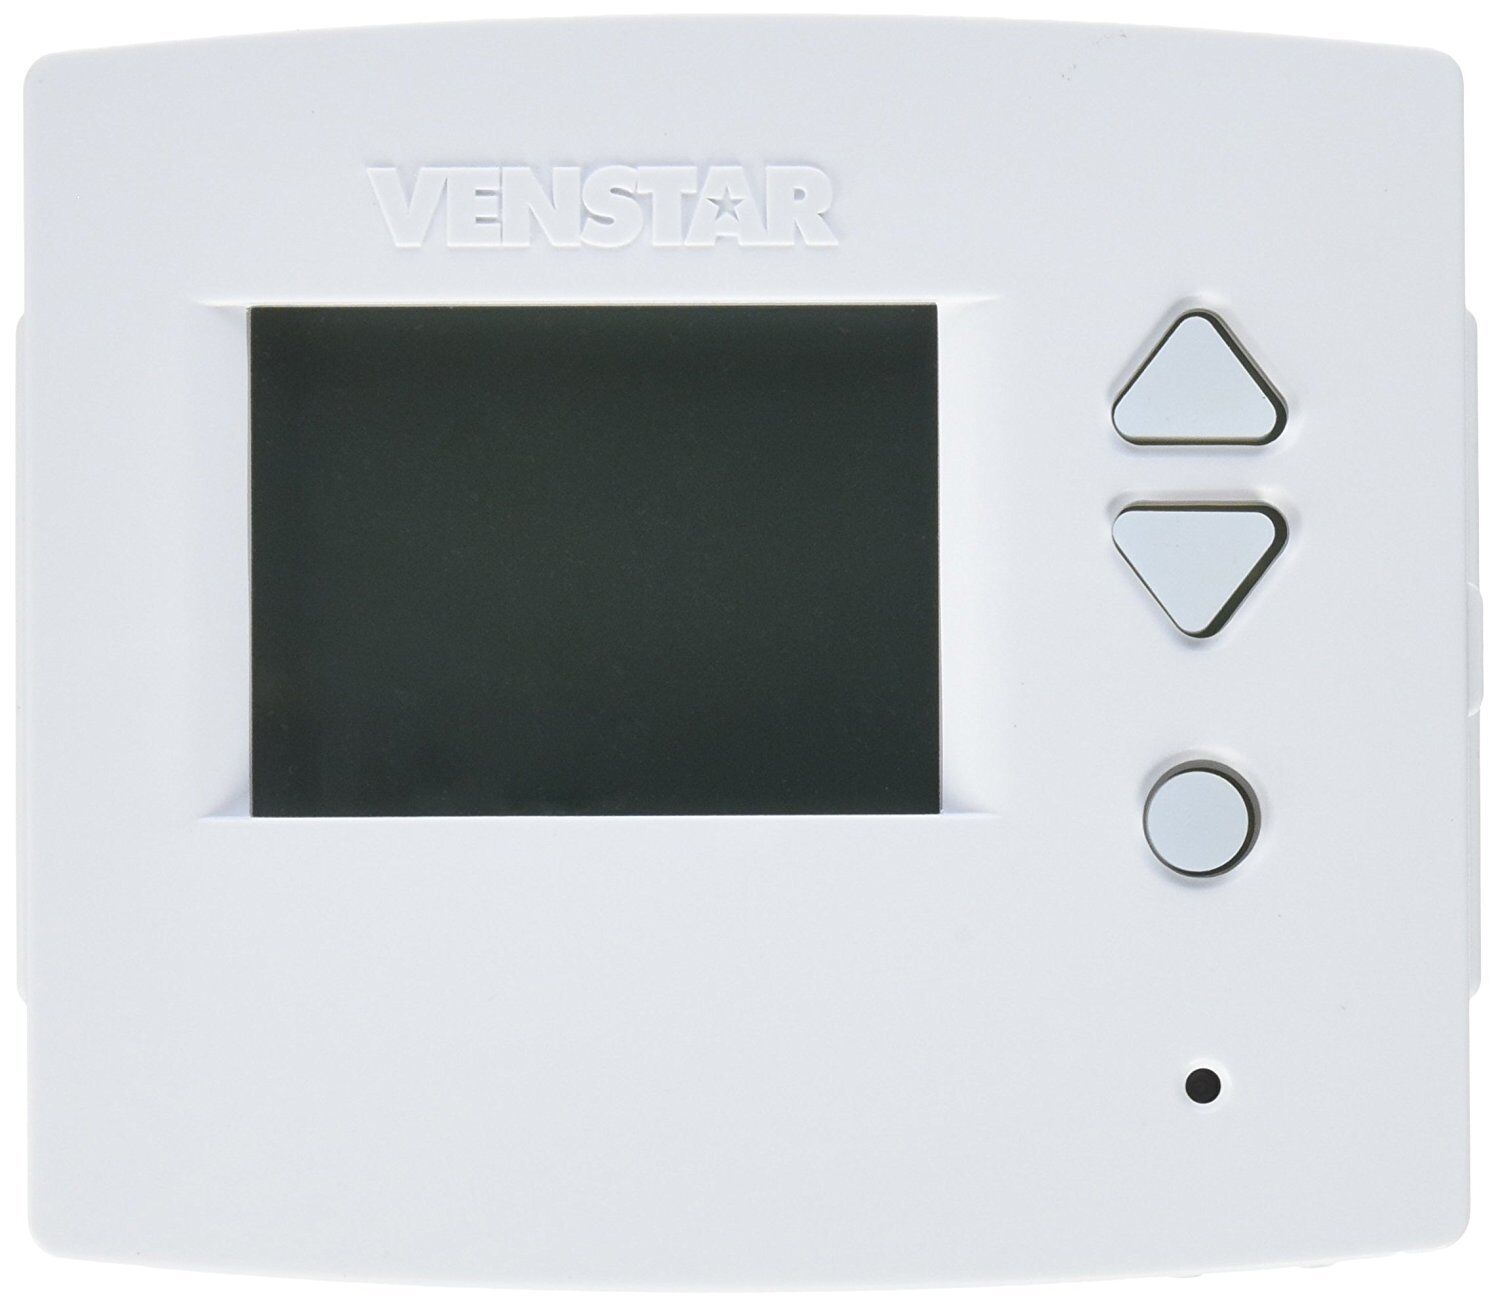 Voyager T3800 Residential Digital Thermostat (4 Heat, 2 Cool)